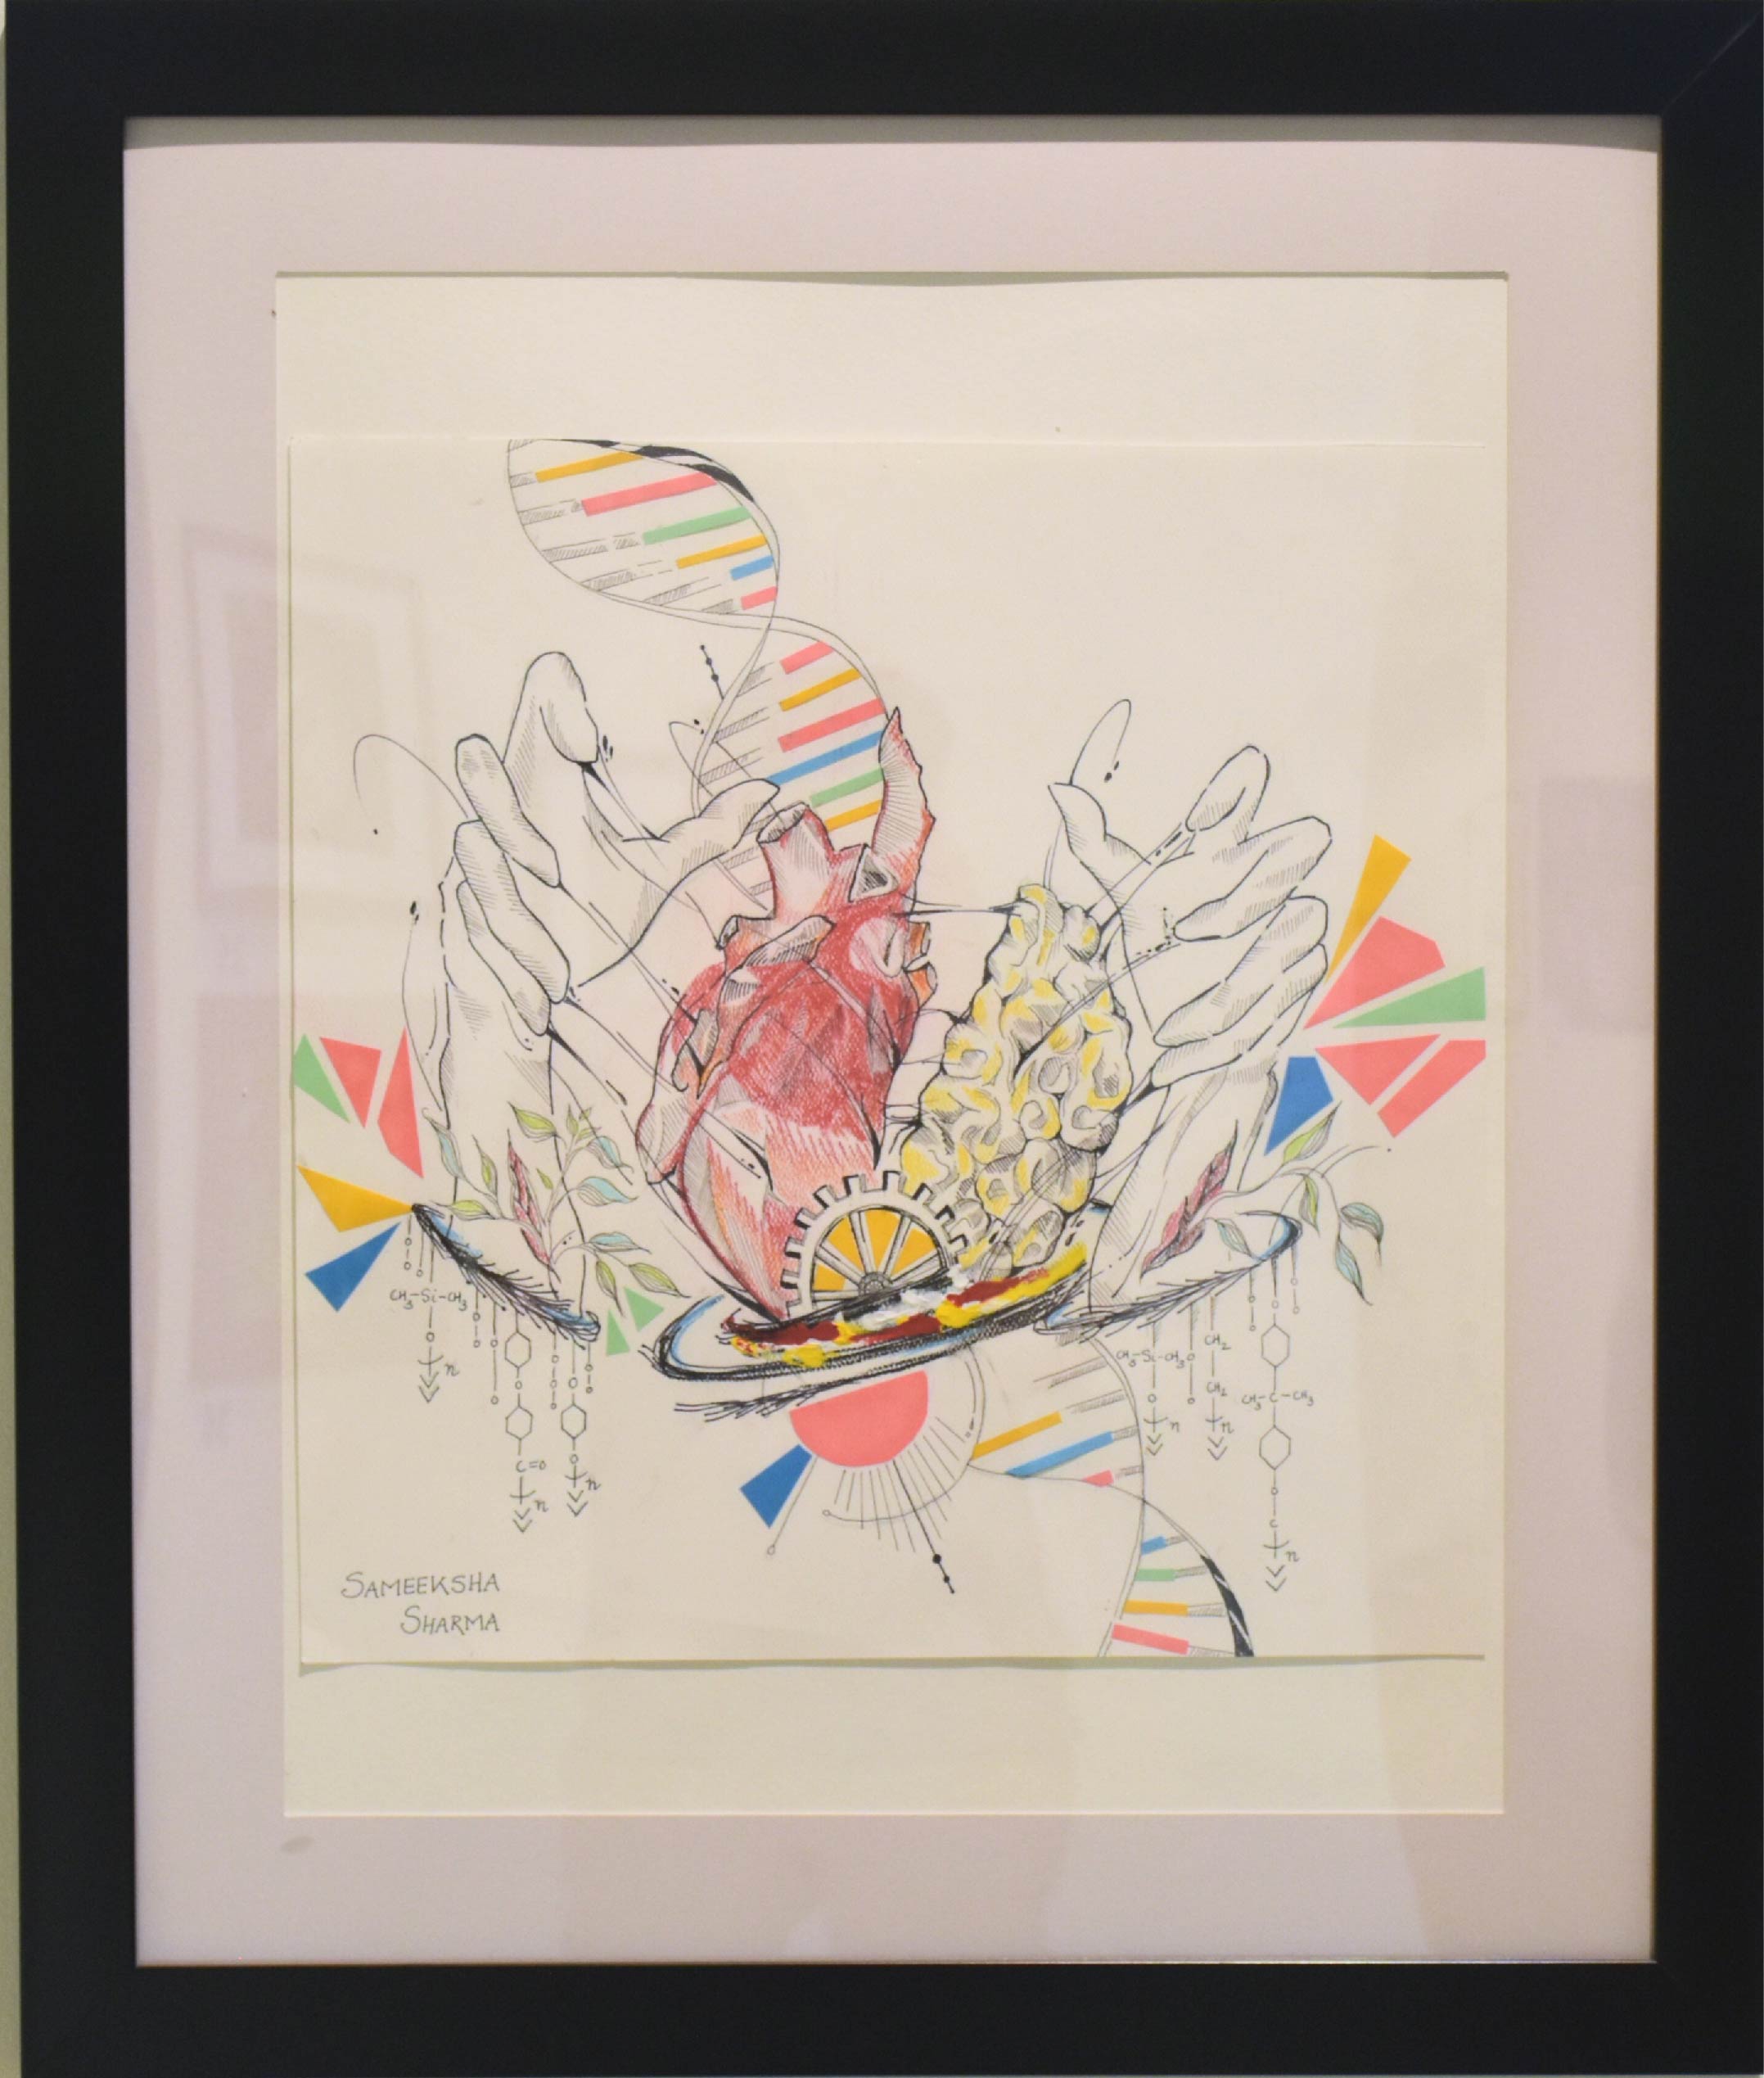 Abstract line drawing featuring bright pops of neon colors. Prominently featured are a human heart, a brain, hands, a DNA double helix, chemistry symbols, and leaves.